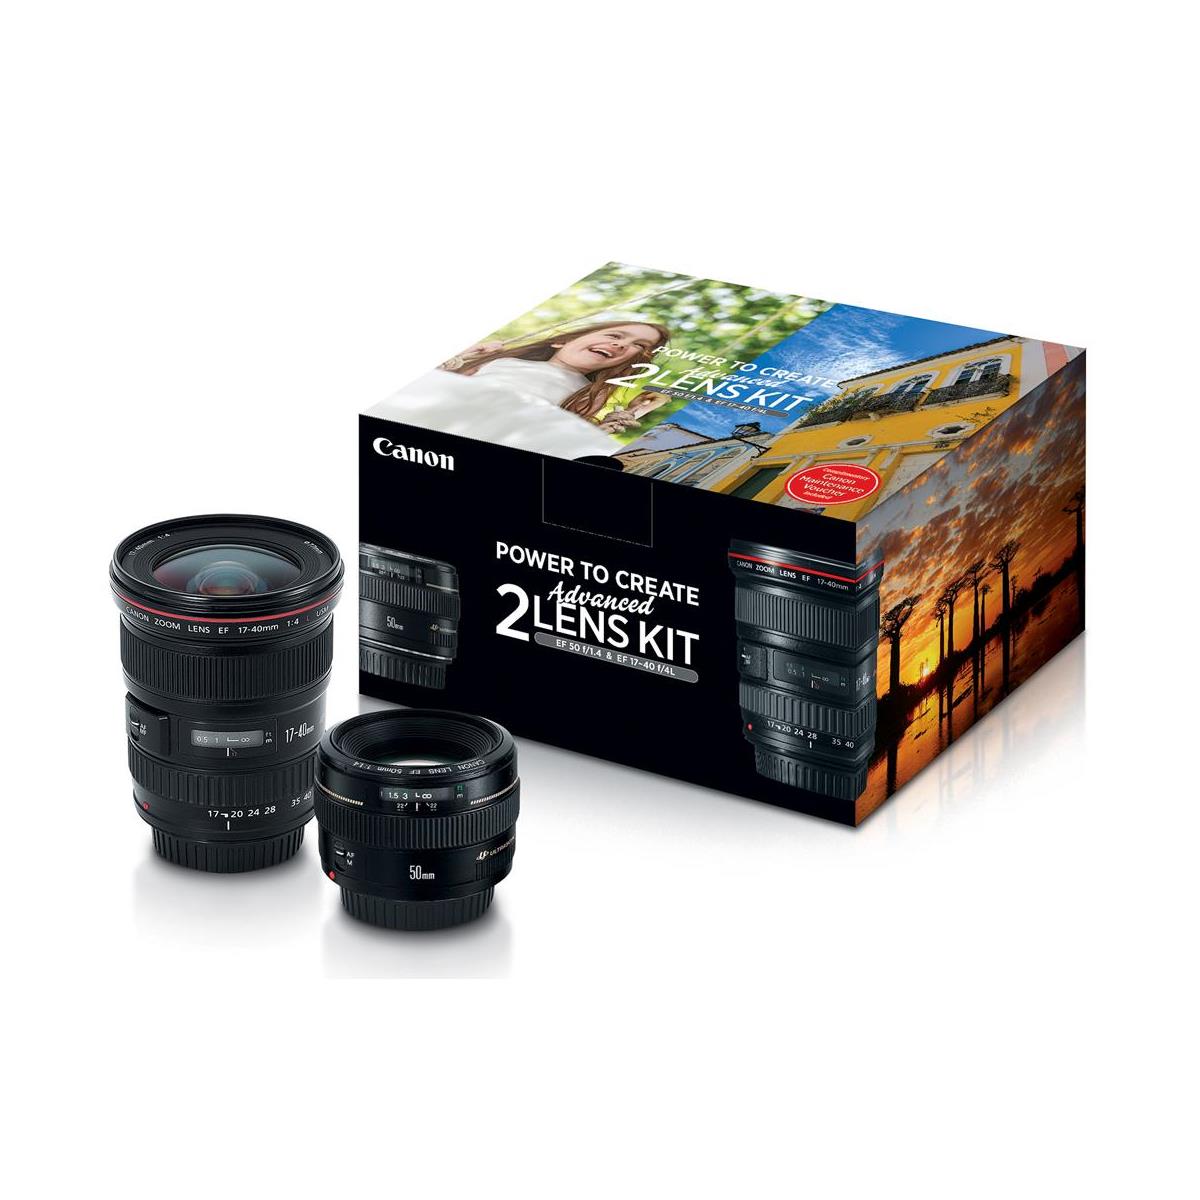 Canon Advanced 2 Lens Kit with 17-40mm  F4 L and 50mm F1.4 USM Lenses